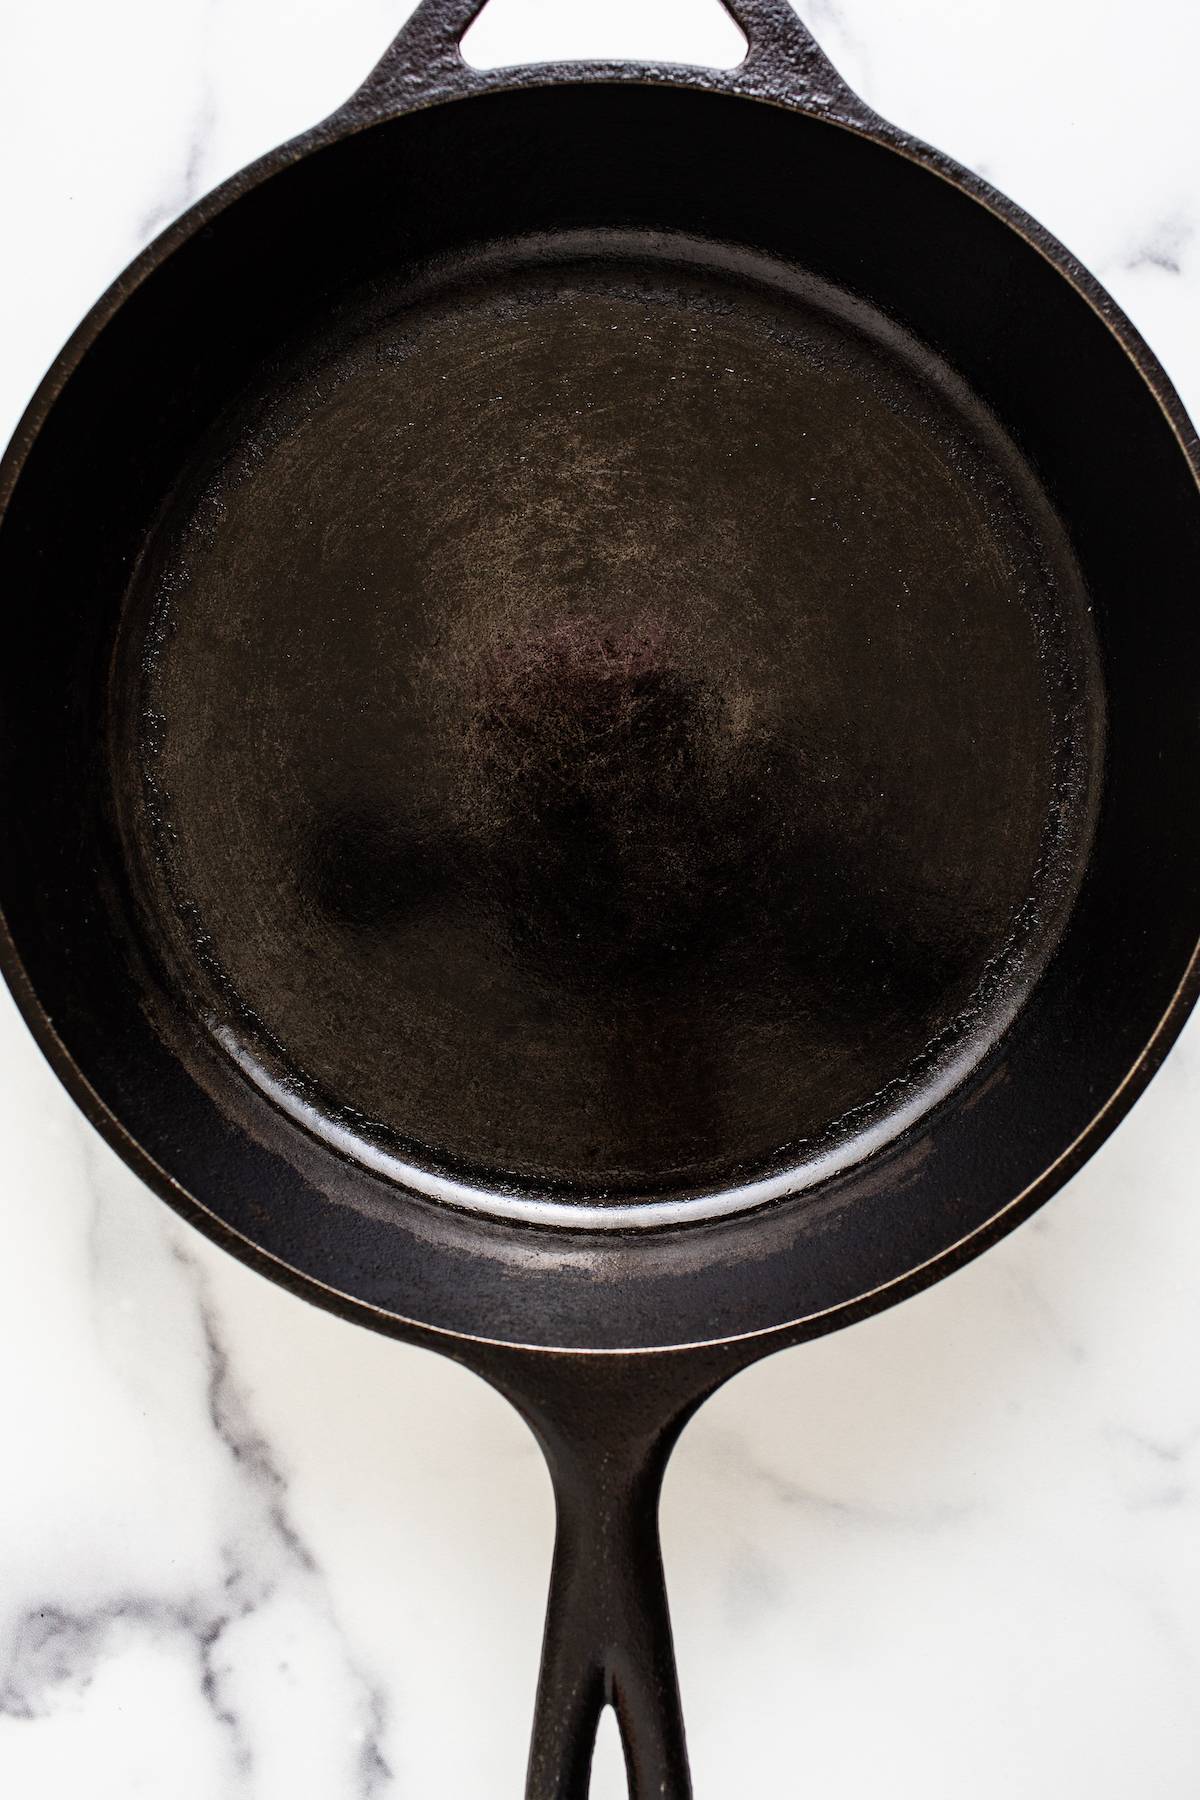 Clean and seasoned Pan made of cast iron.